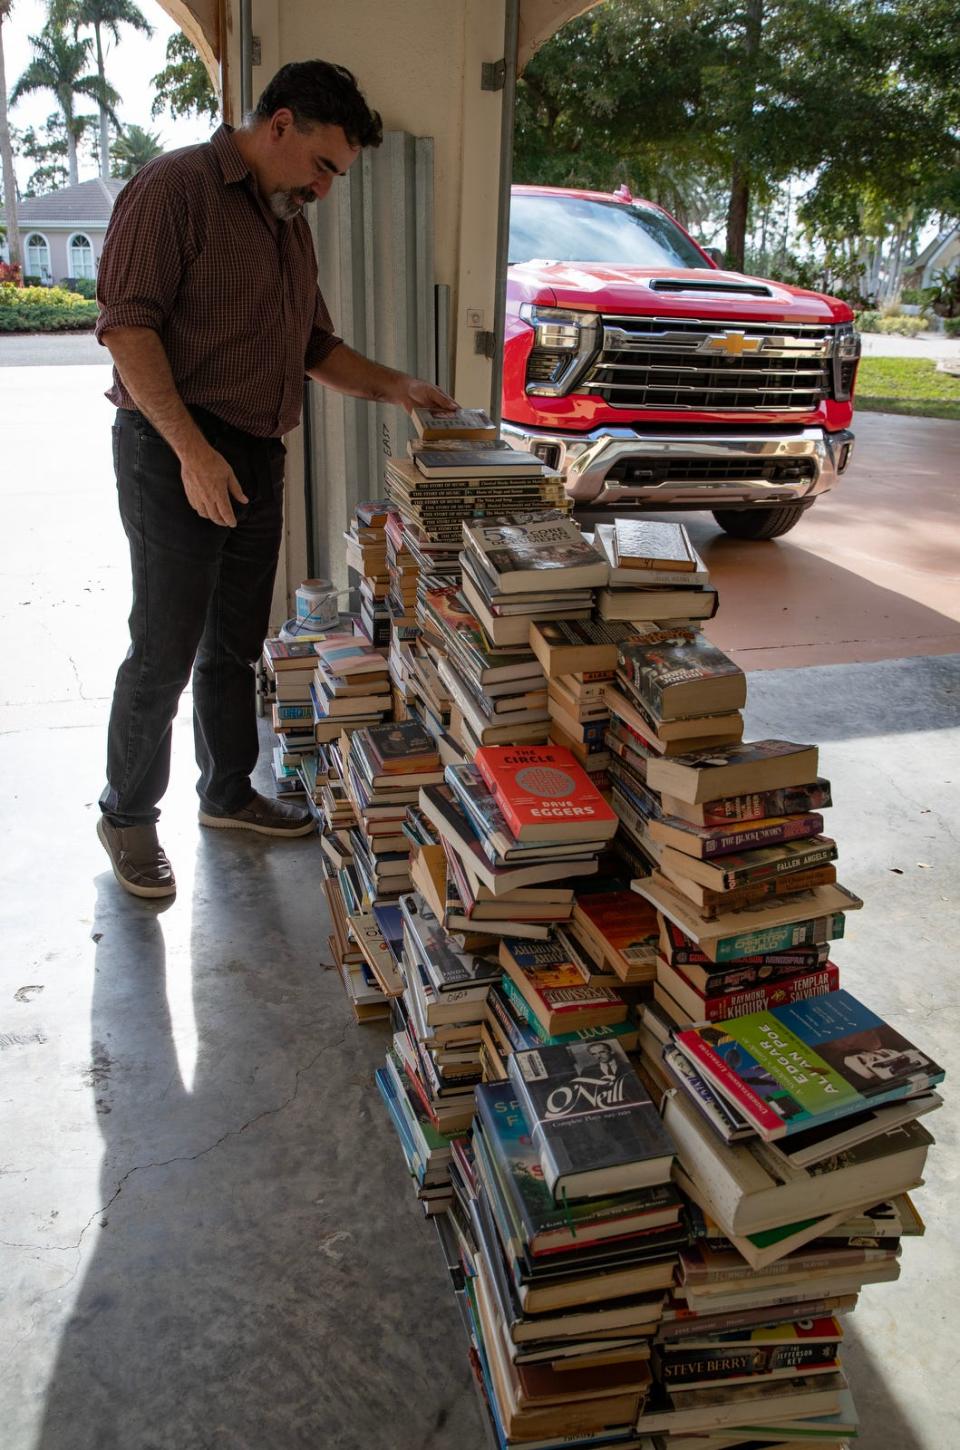 Michael Andoscia, a former teacher at North Fort Myers high school, resigned his position of 8 years after the school removed his in-class library consisting of over 600 books. He has most of the books currently stored in his garage at his Fort Myers home.